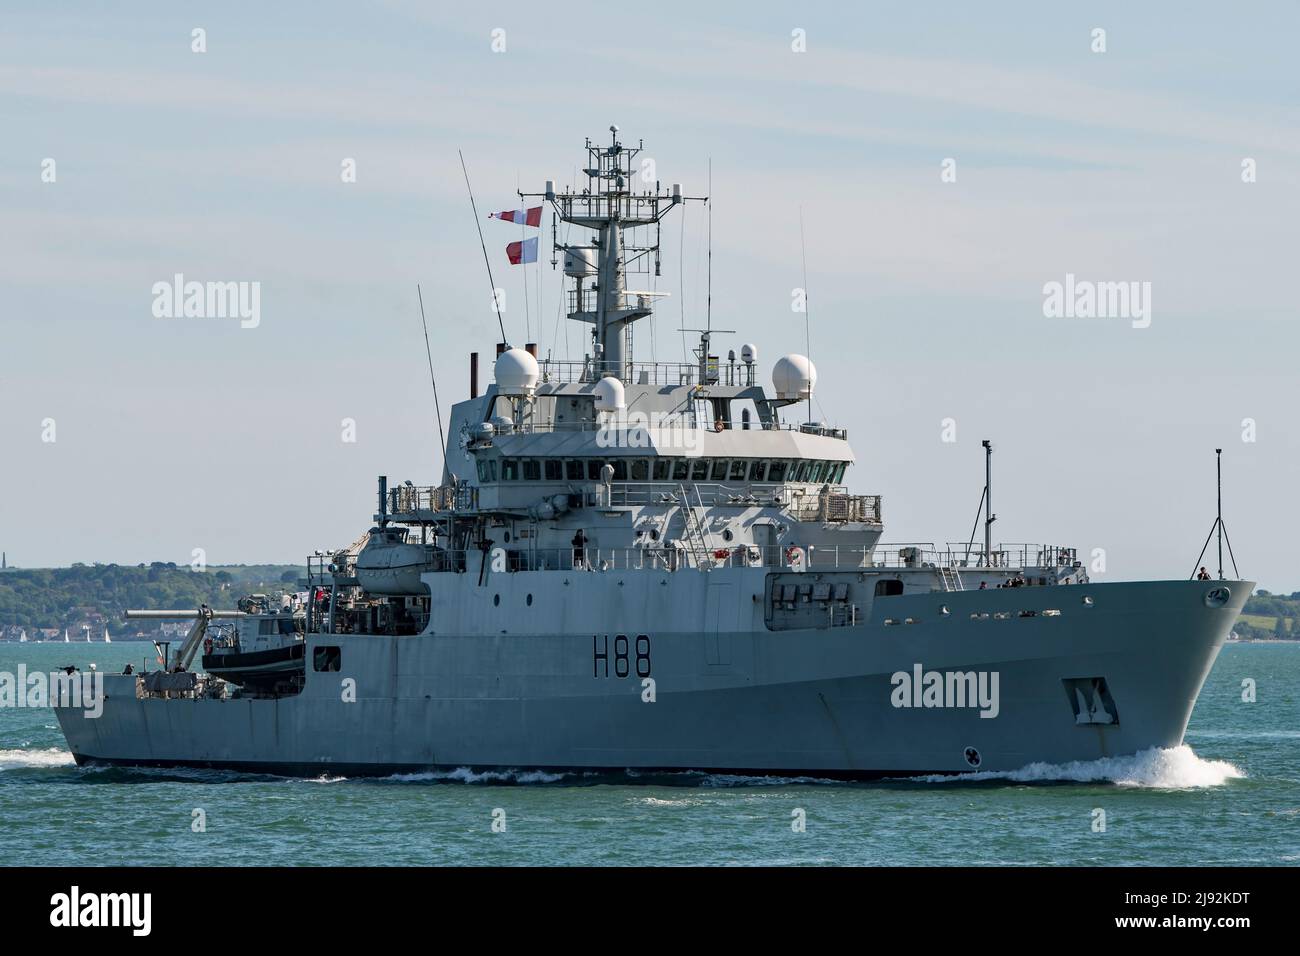 The Royal Navy hydrographic survey ship HMS Enterprise (H88) approaching Portsmouth, UK on the 19th May 2022. Stock Photo